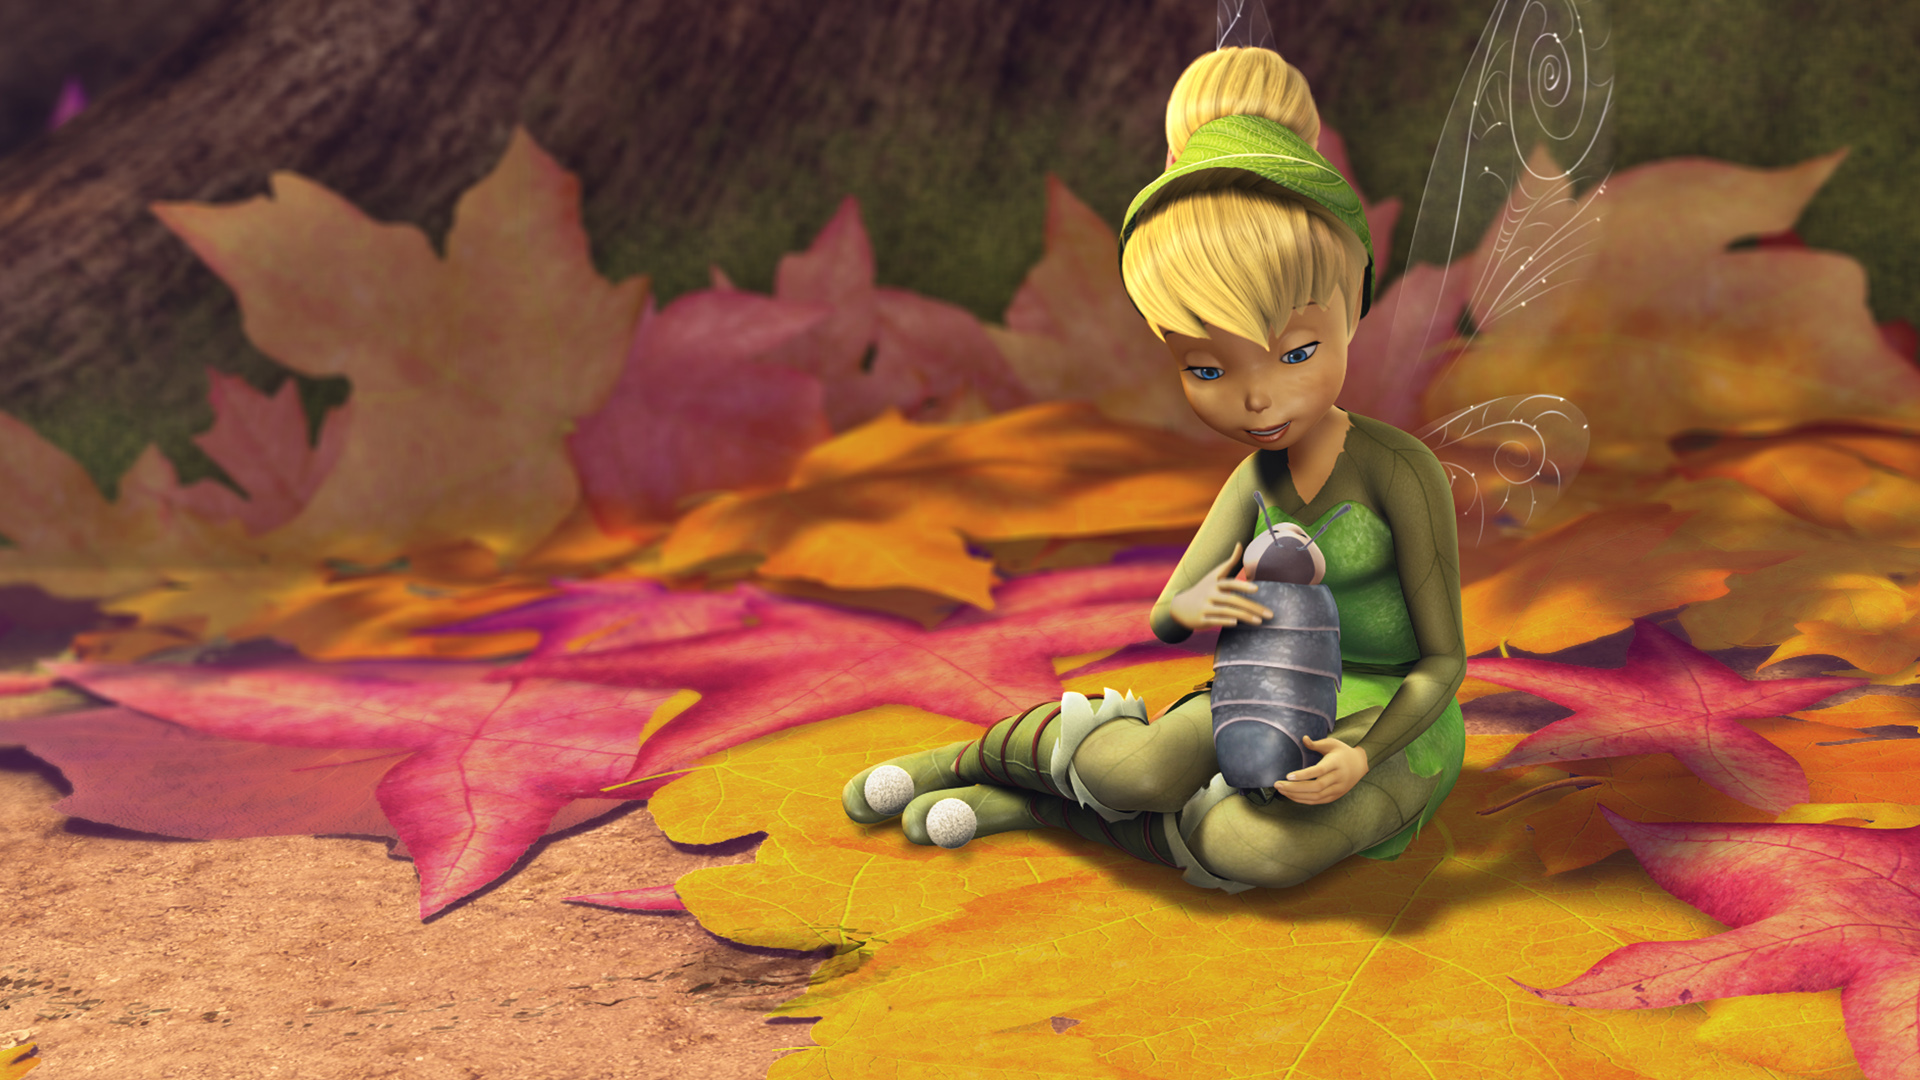 Movie Tinker Bell and the Lost Treasure HD Wallpaper | Background Image